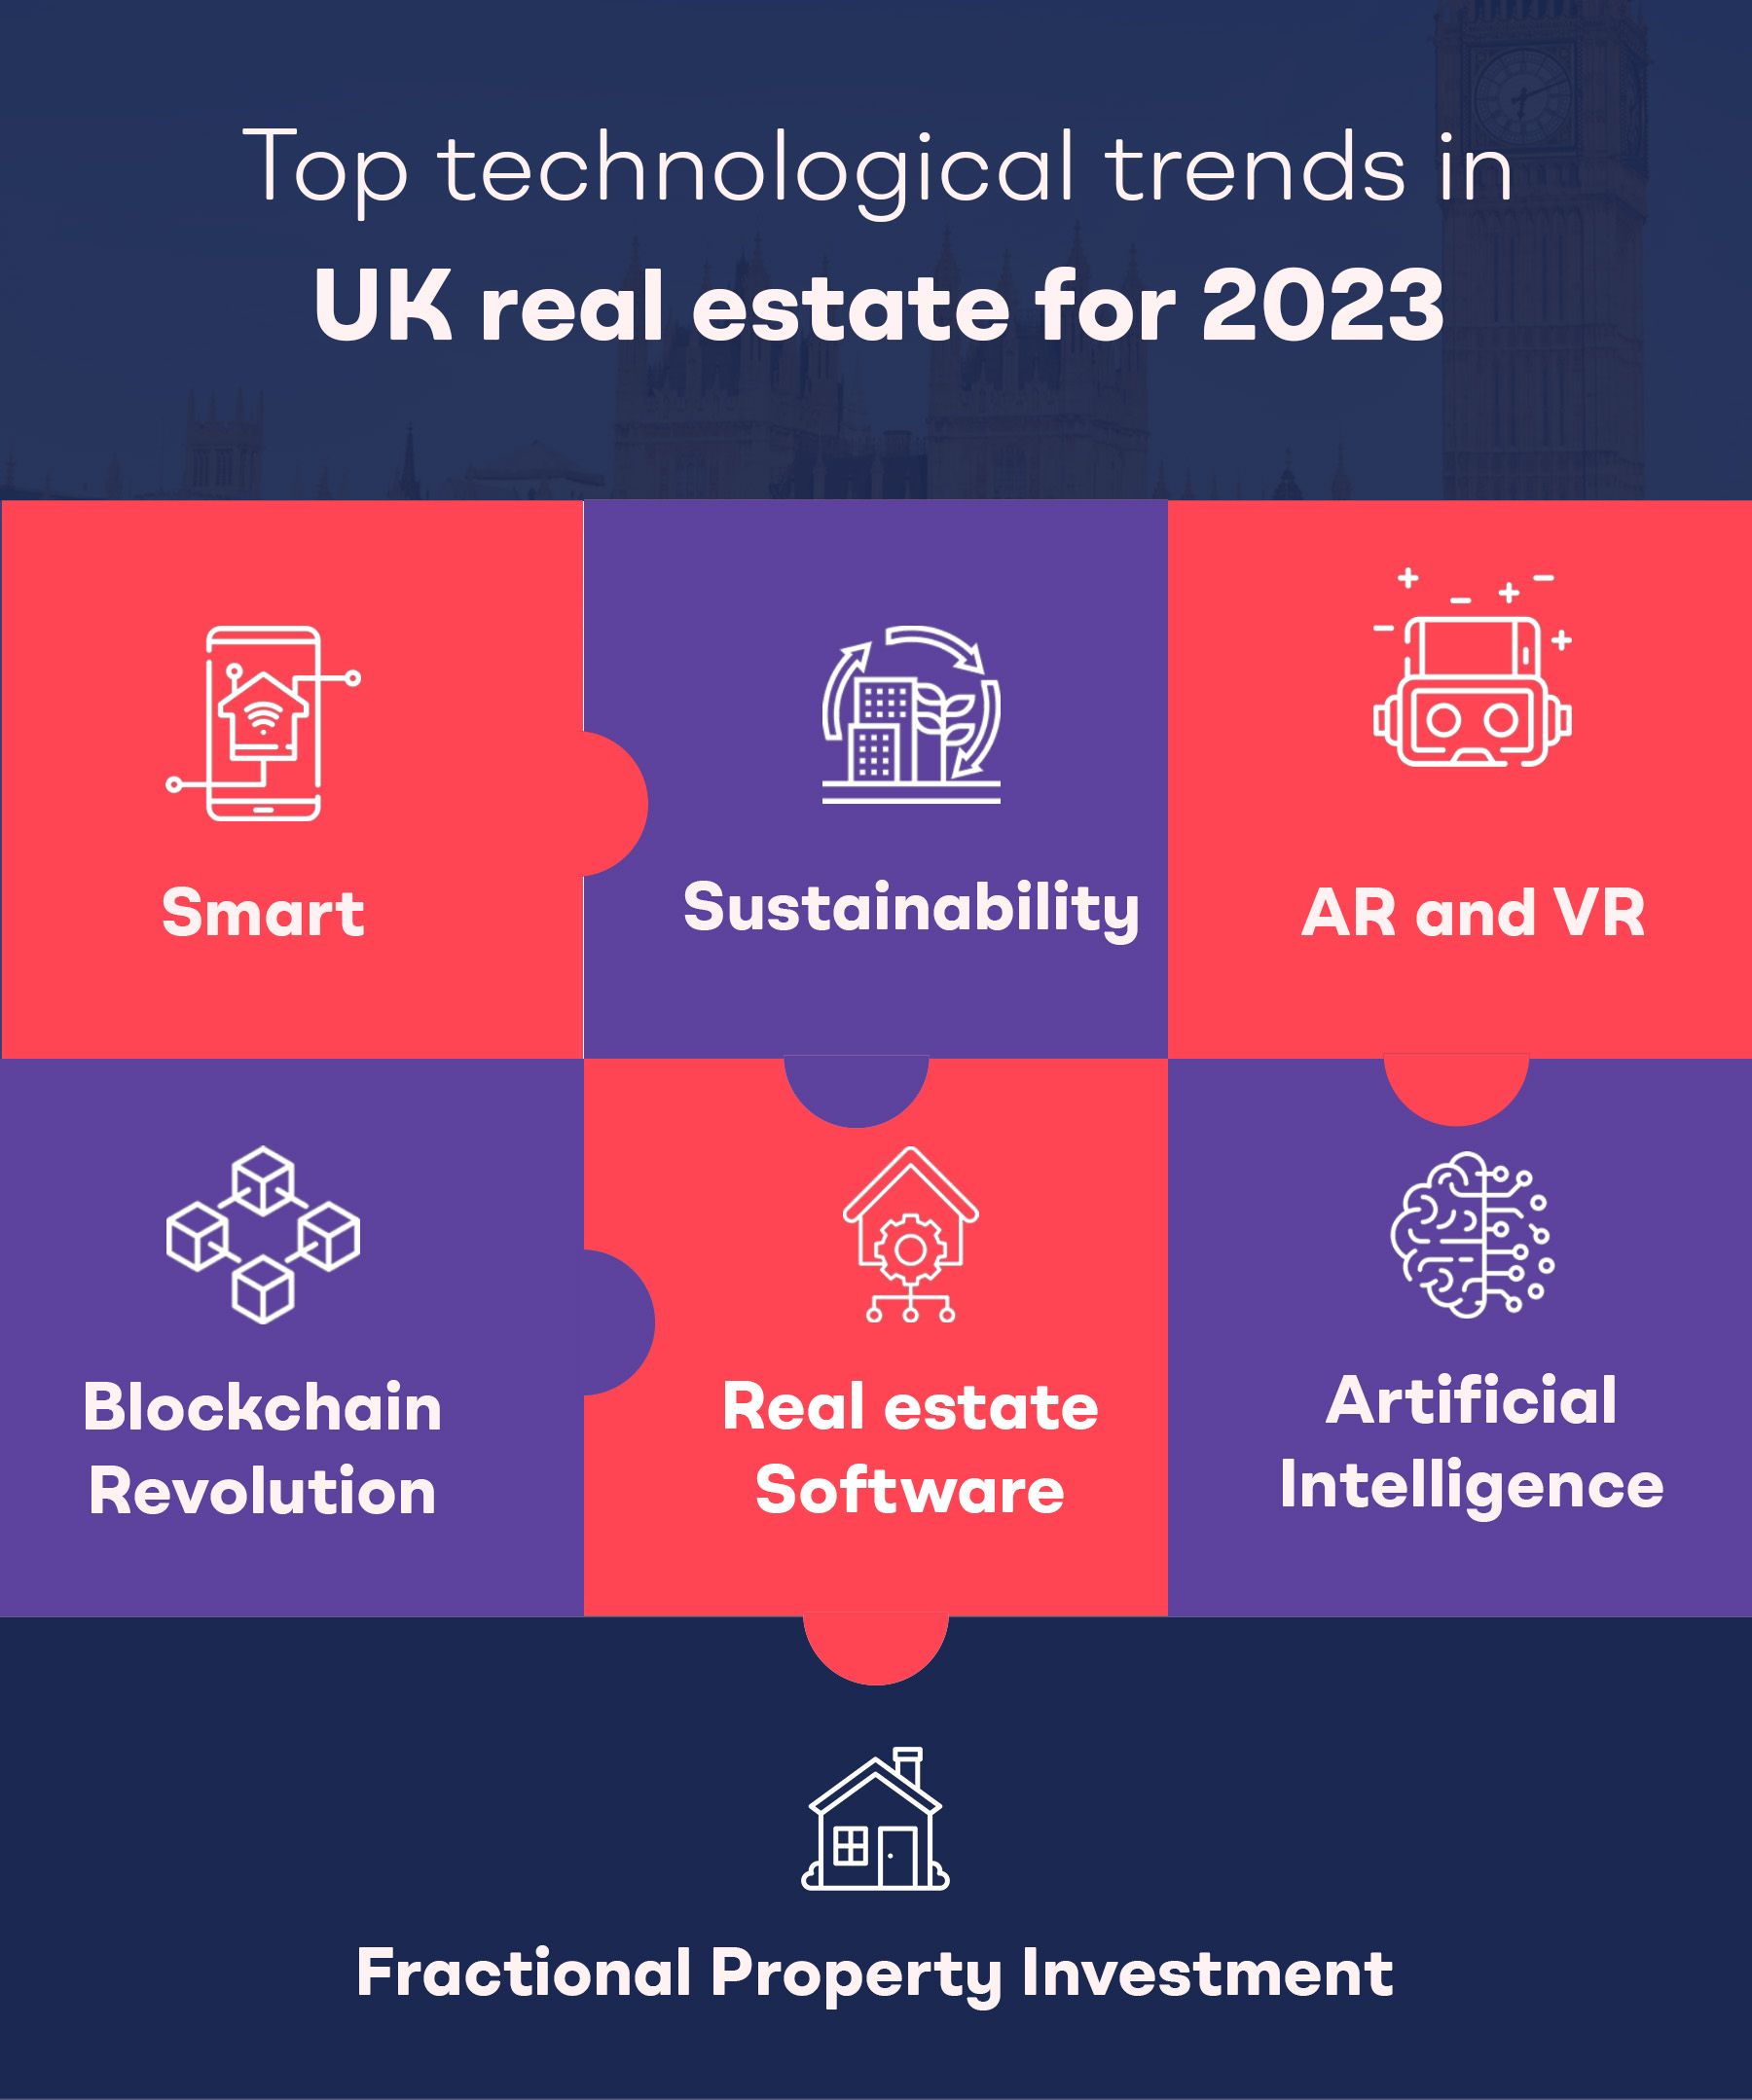 Real Estate: Digital Transformation Restructuring the UK Property Sector